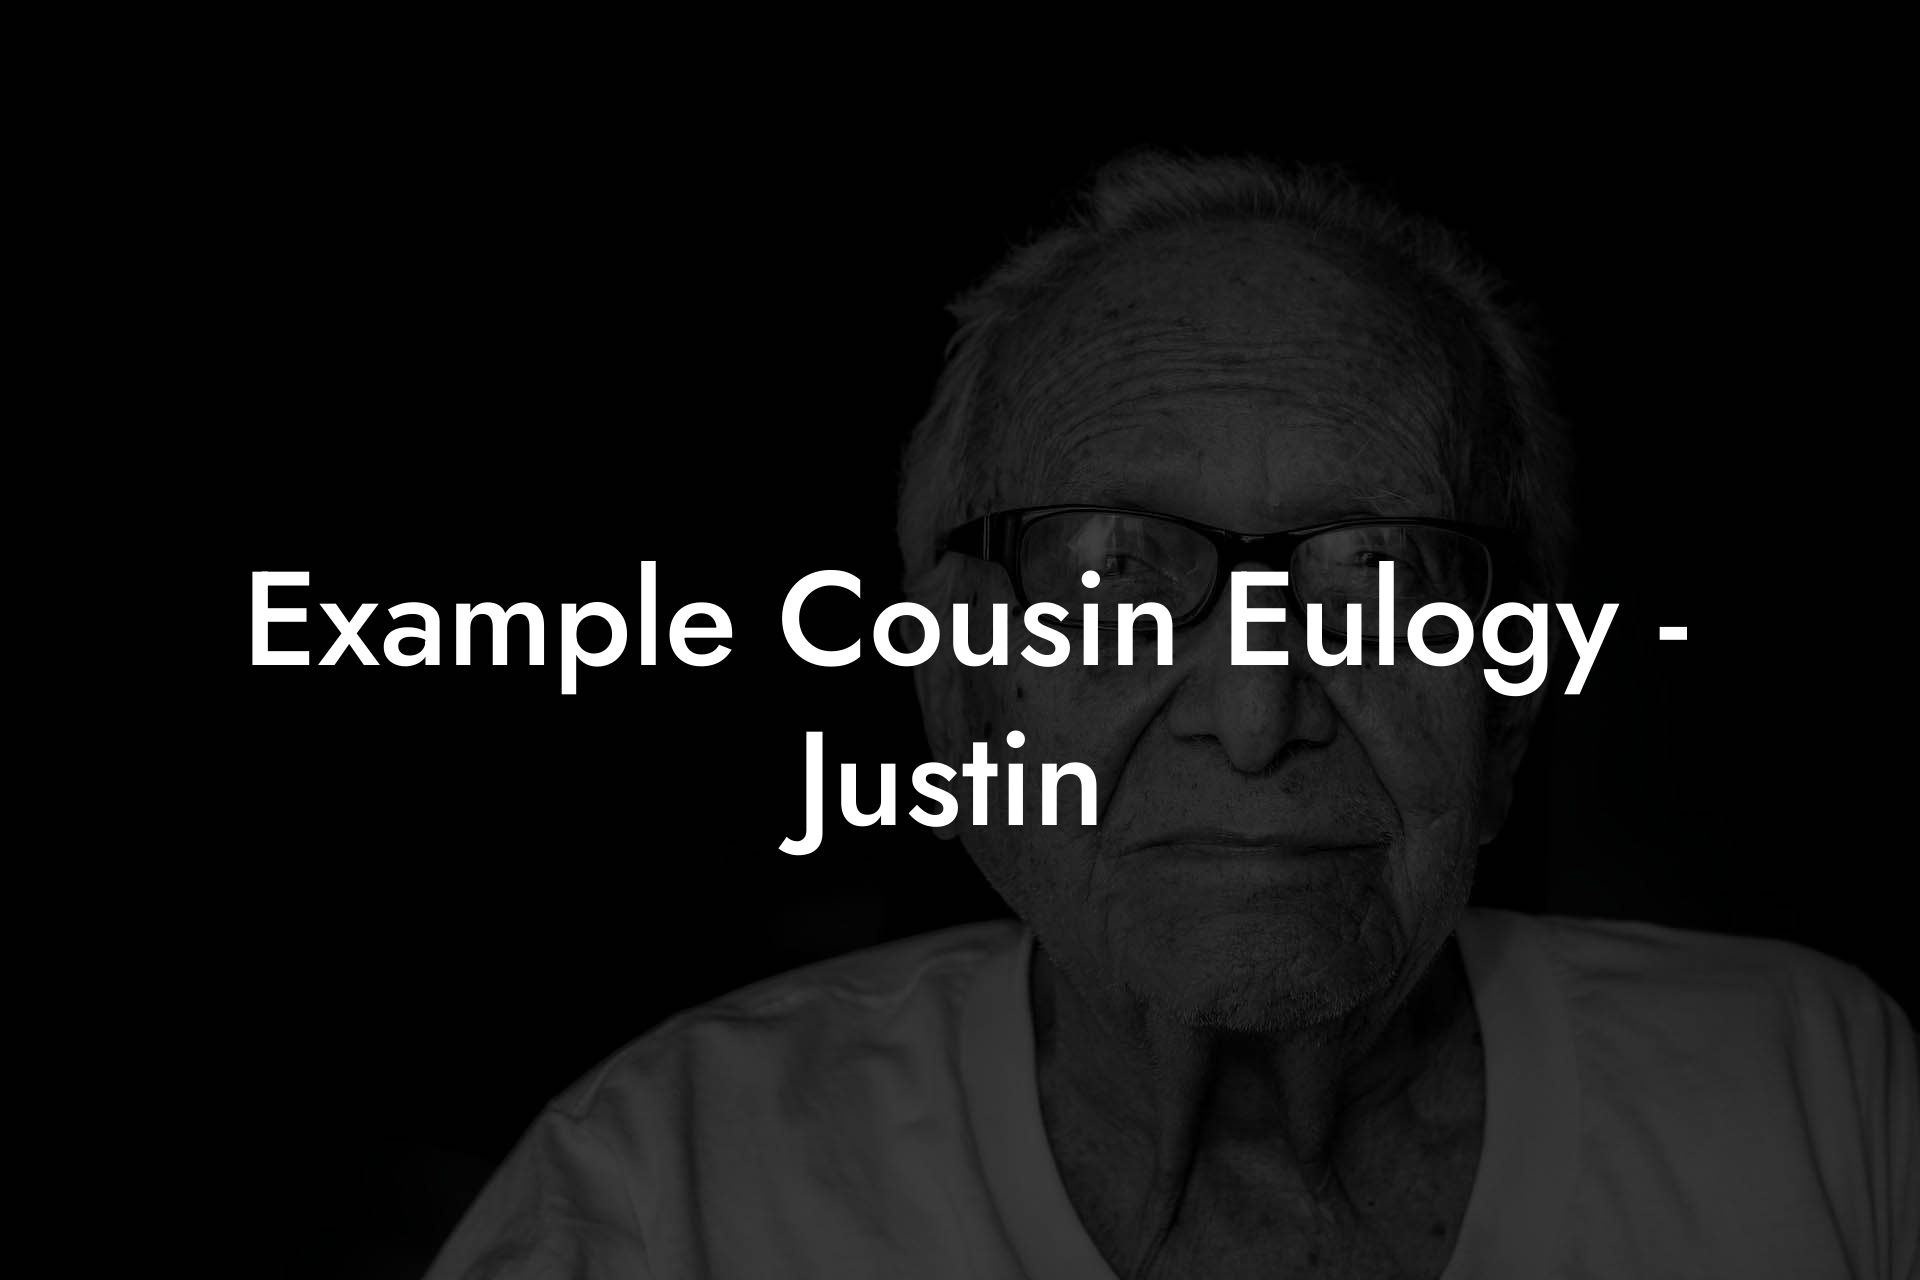 Example Cousin Eulogy - Justin